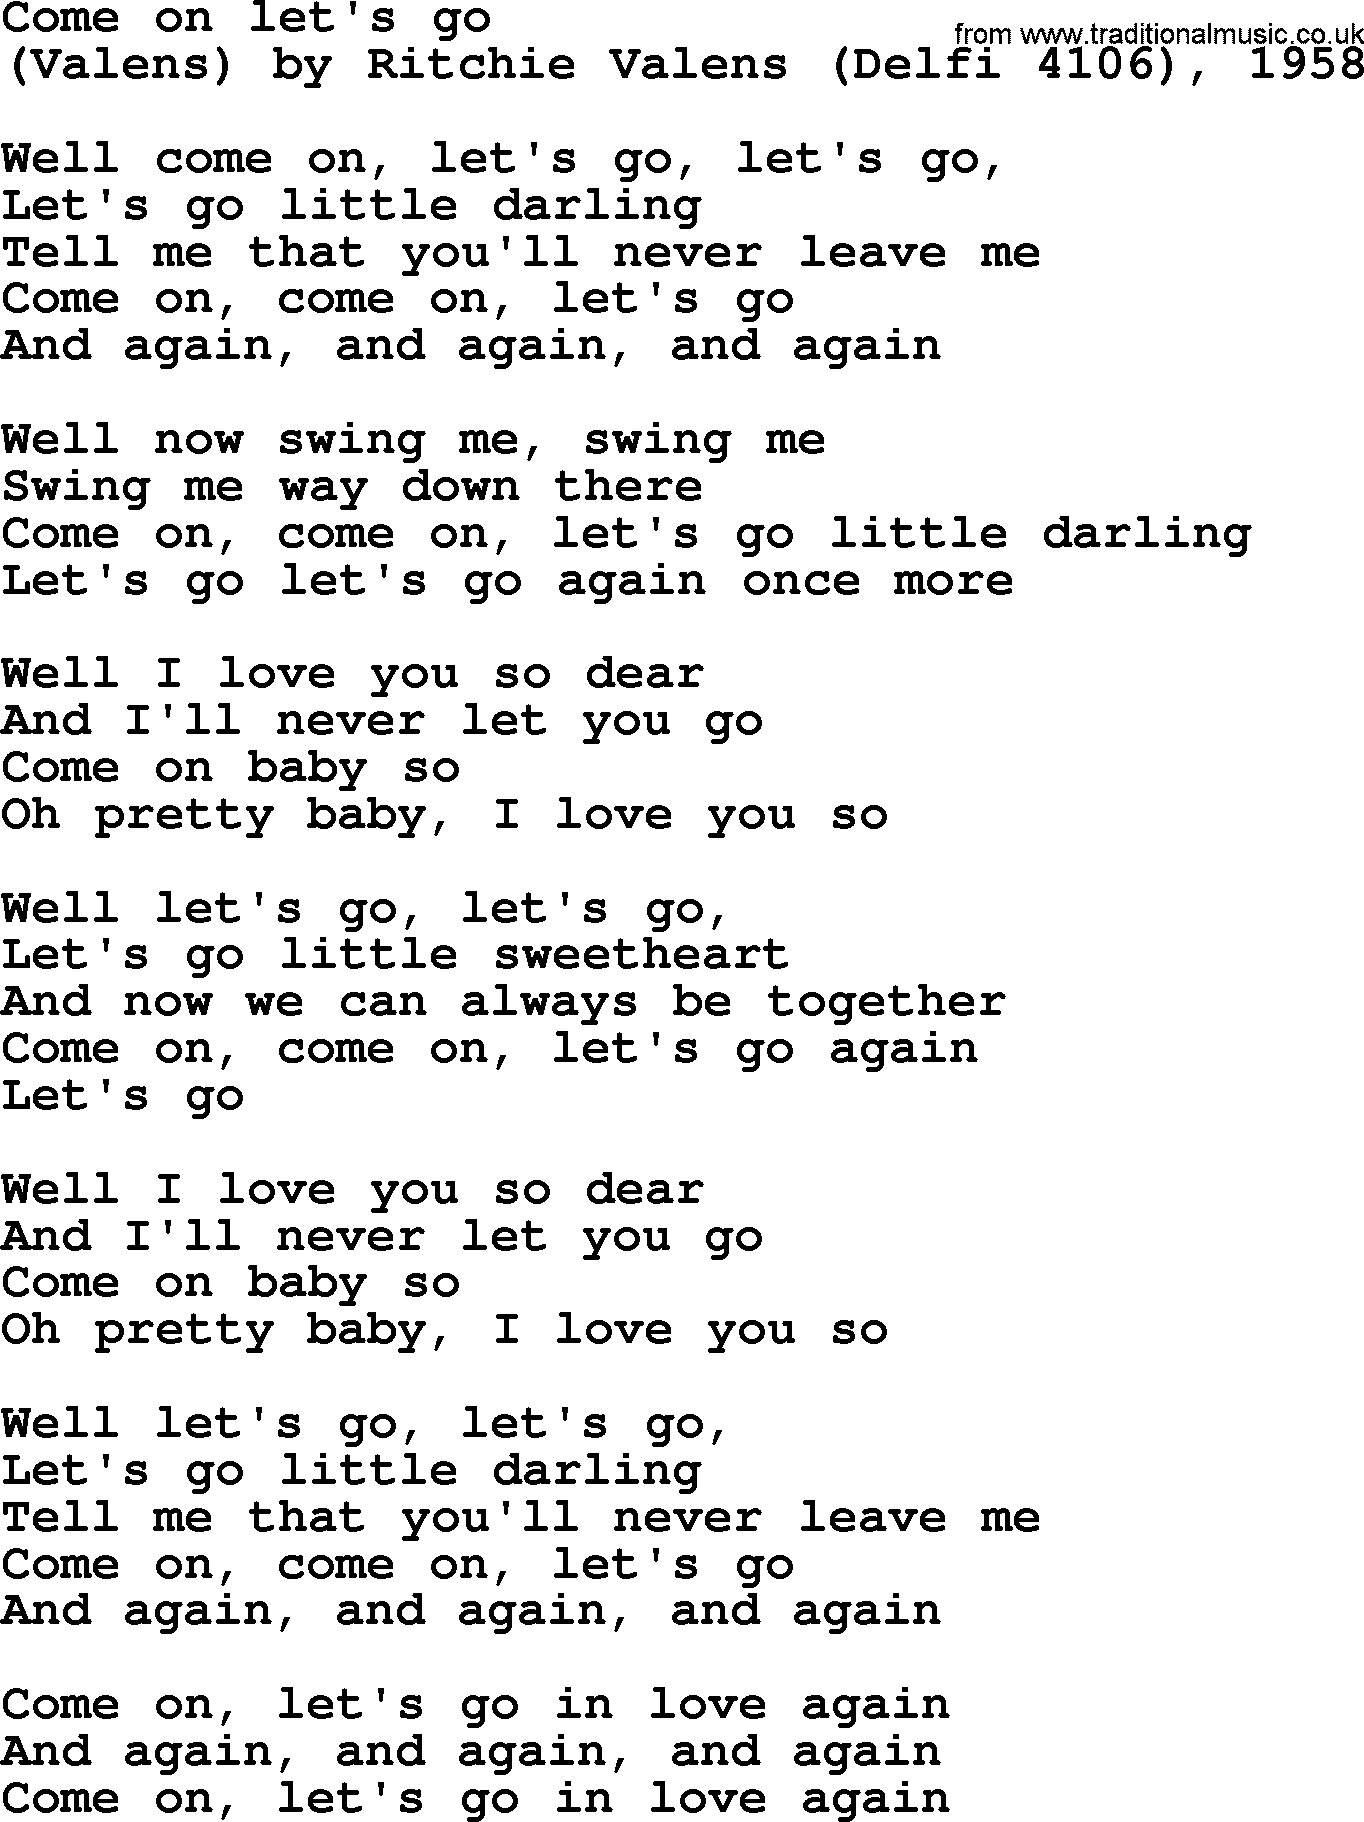 Bruce Springsteen song: Come On Let's Go lyrics